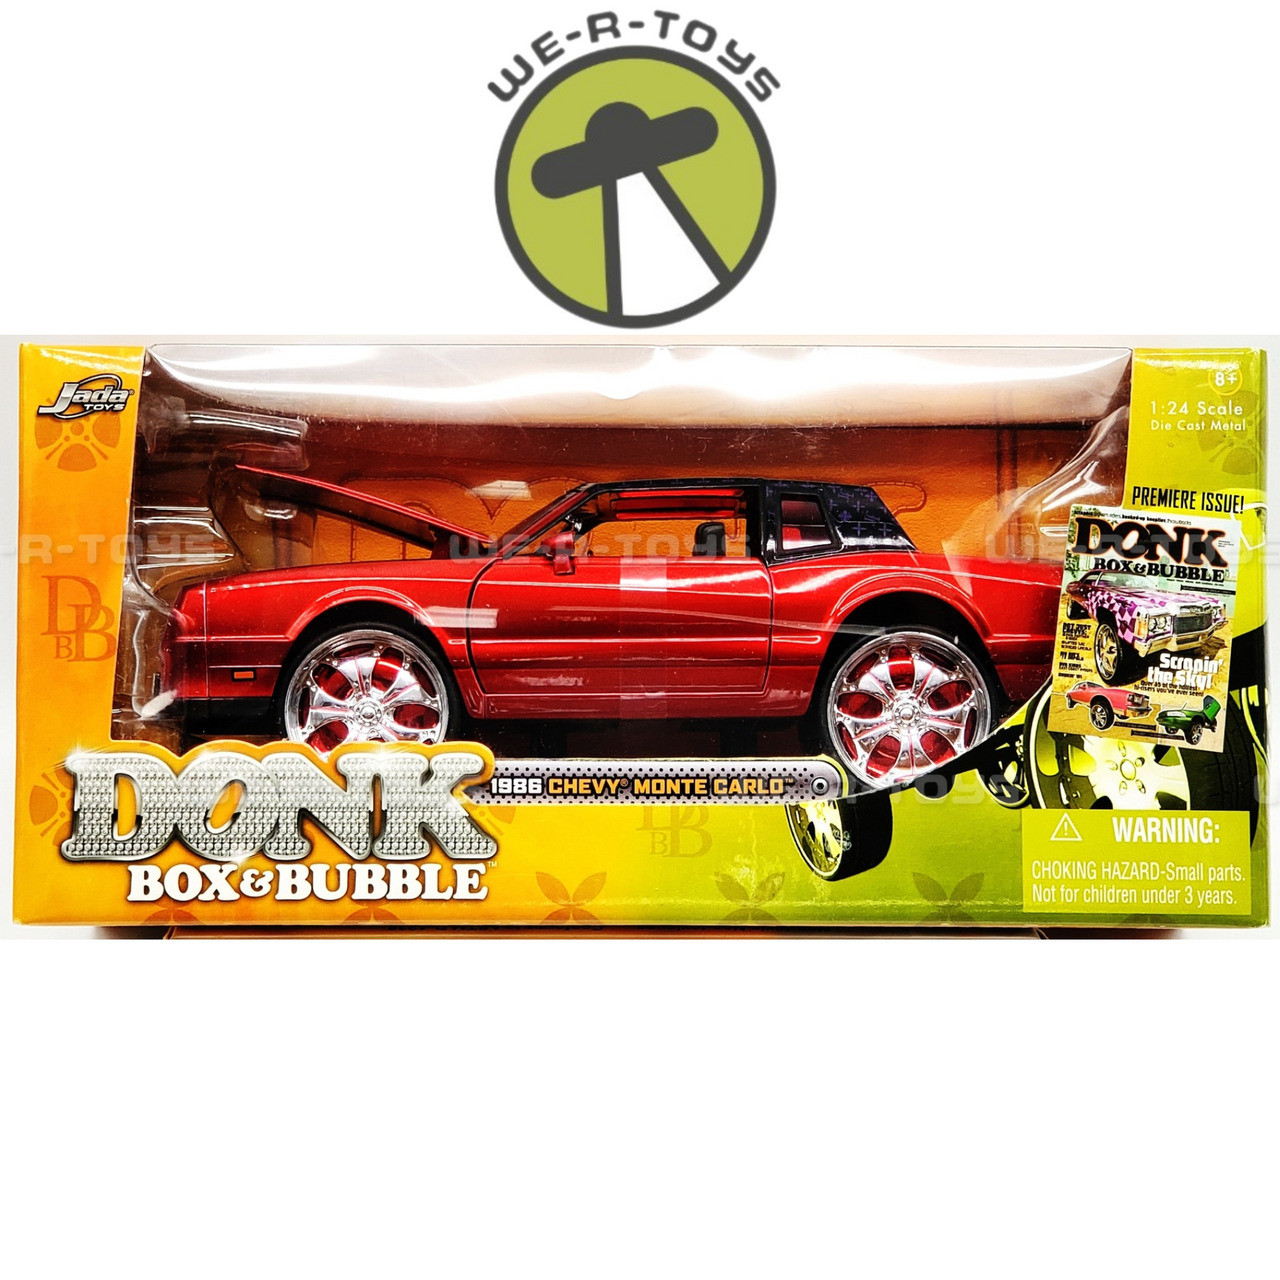 Donk Box & Bubble 1986 Chevy Monte Carlo Vehicle Jada Toys 2006 No. 53030  NRFB - We-R-Toys